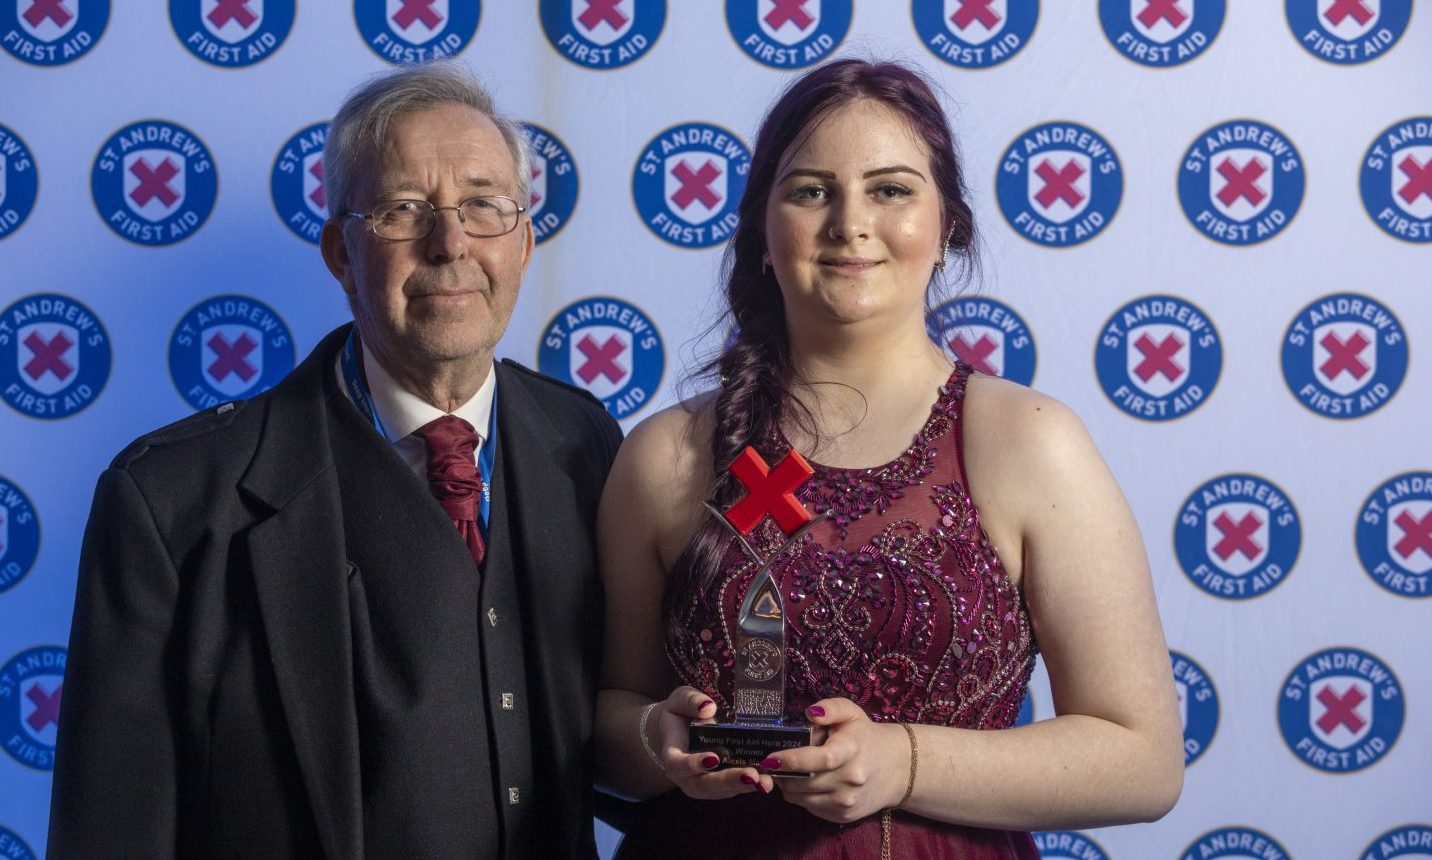 Alexis Mackie won the young first aid hero award